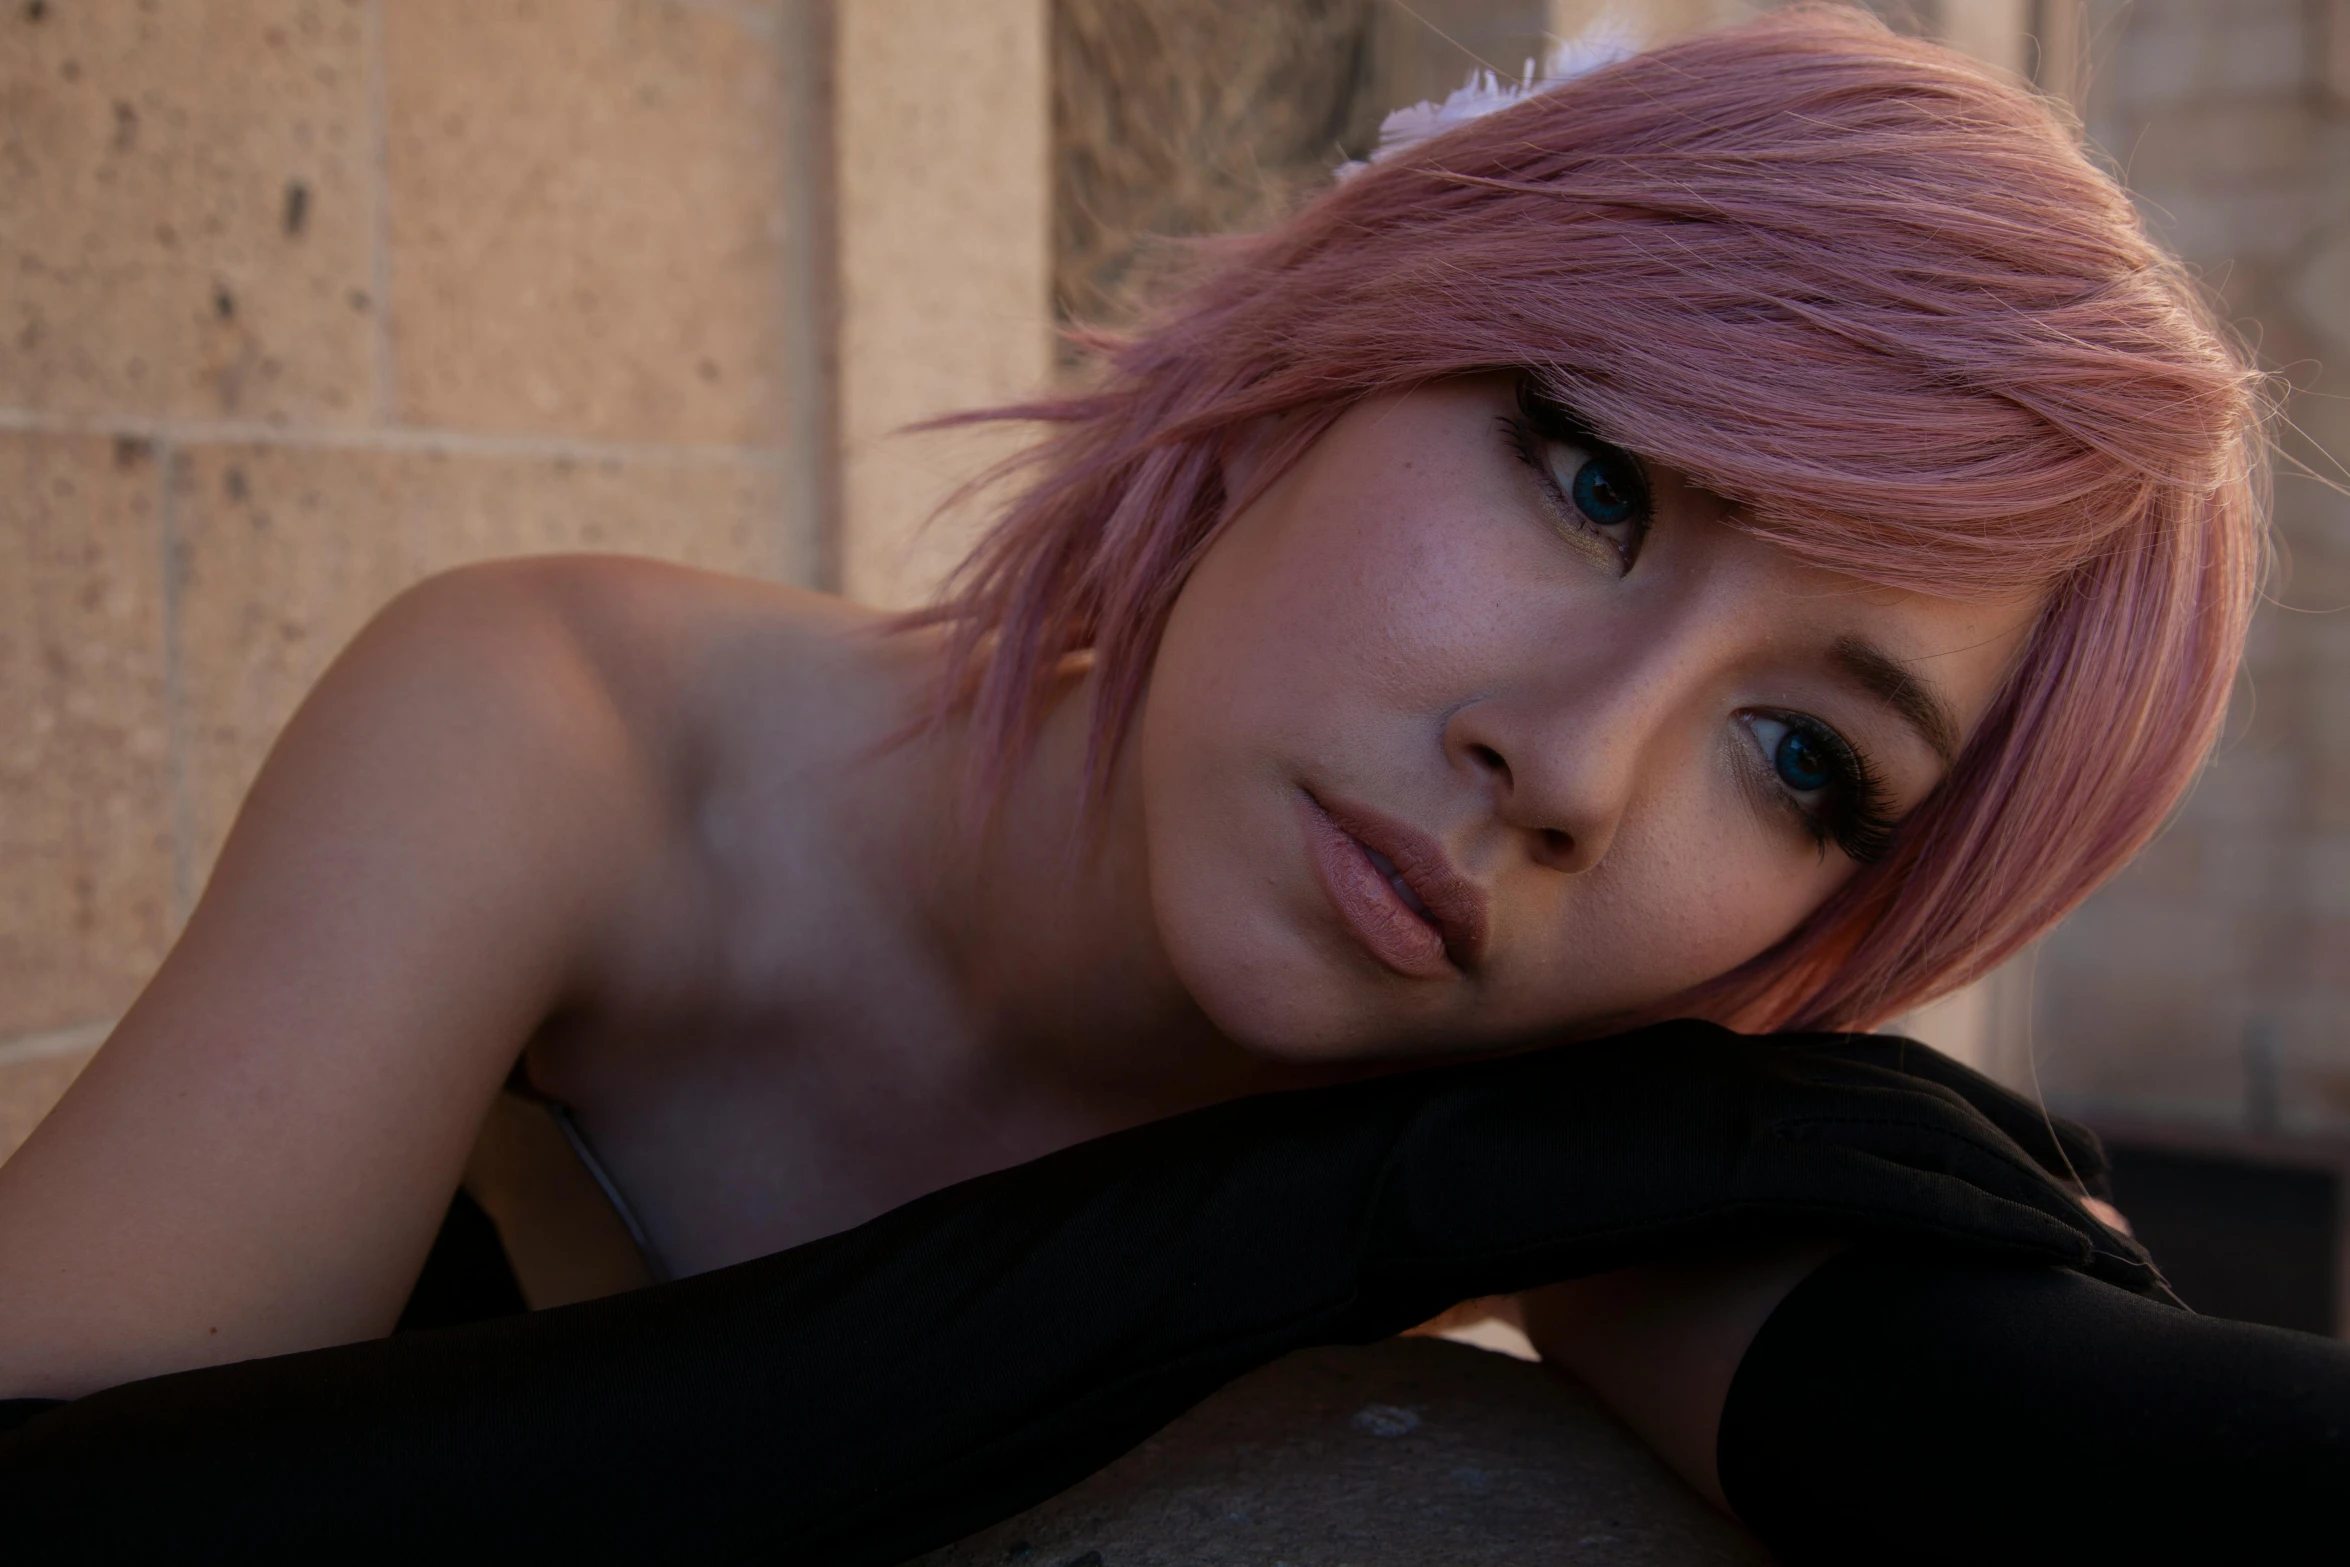 a woman with pink hair and black gloves posing